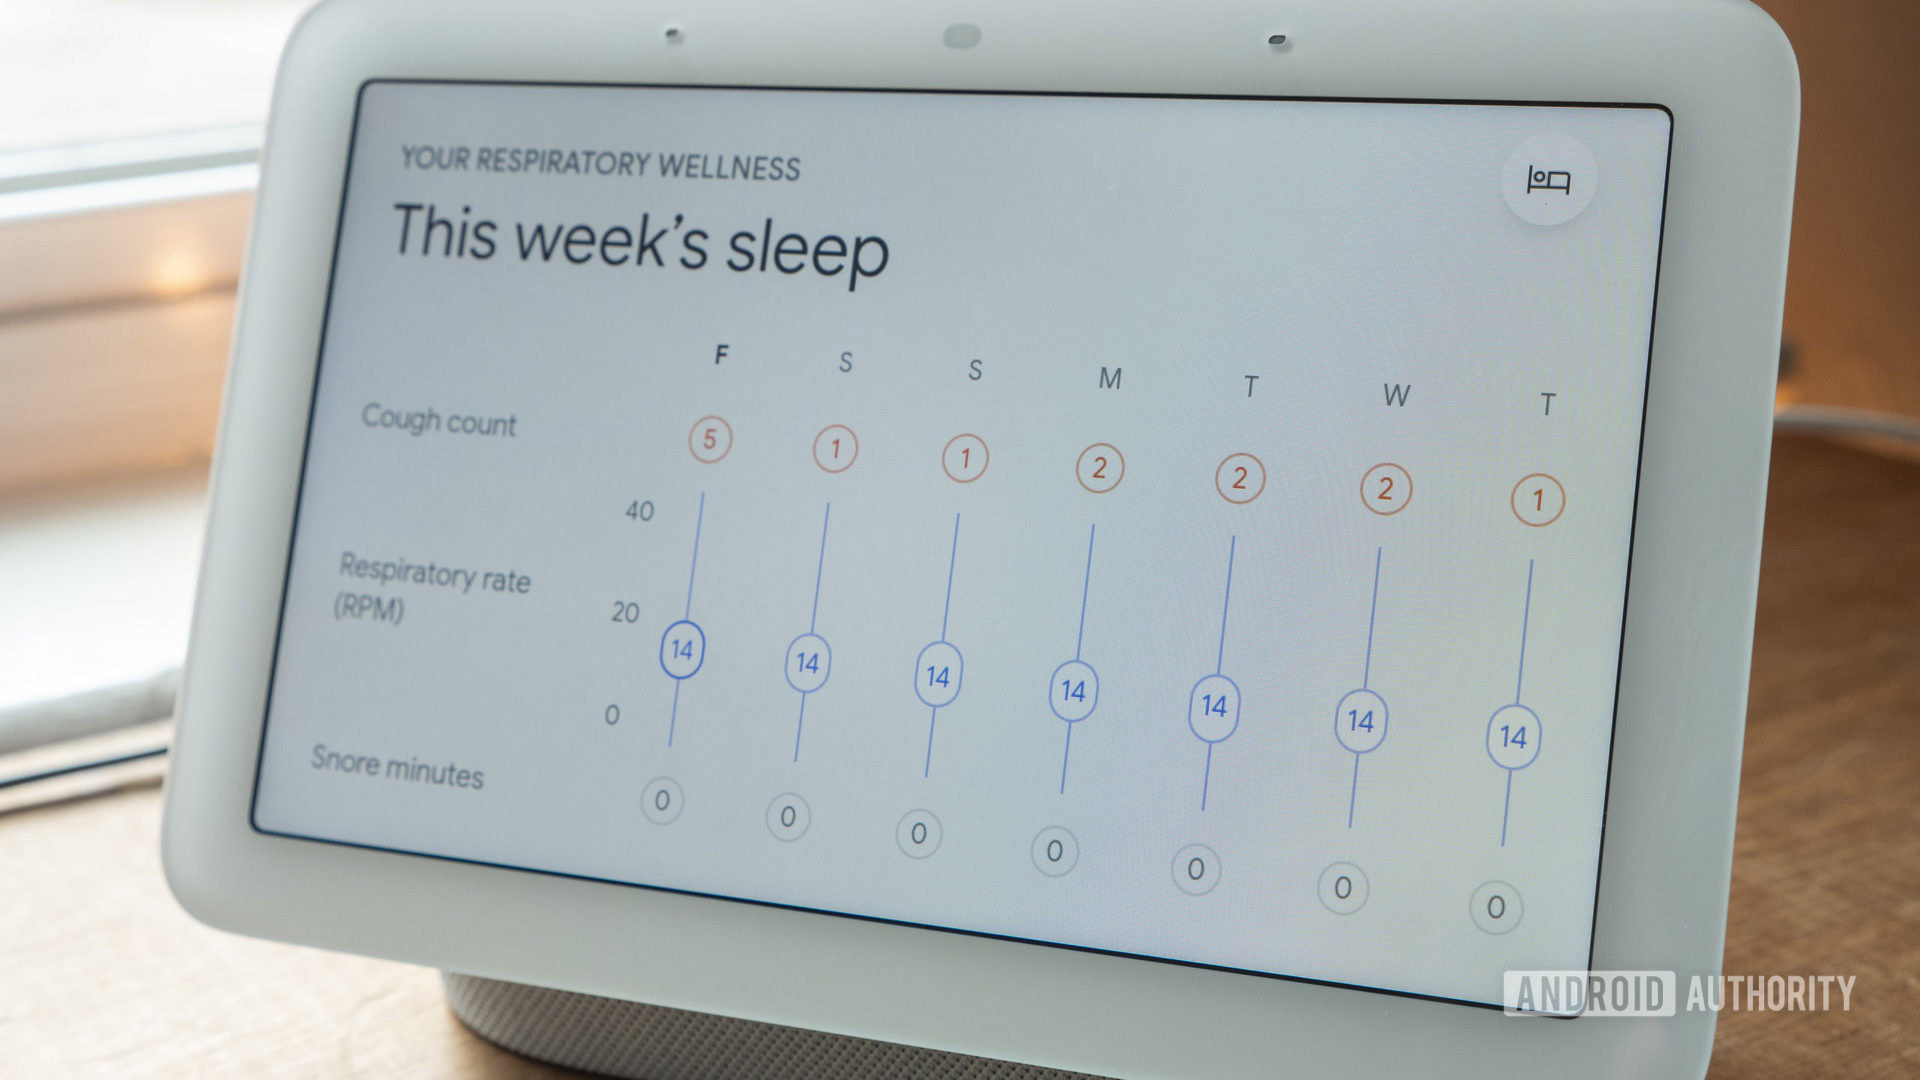 A Google Nest Hub 2nd Gen is set on user's bed side table, displaying their respiratory wellness.